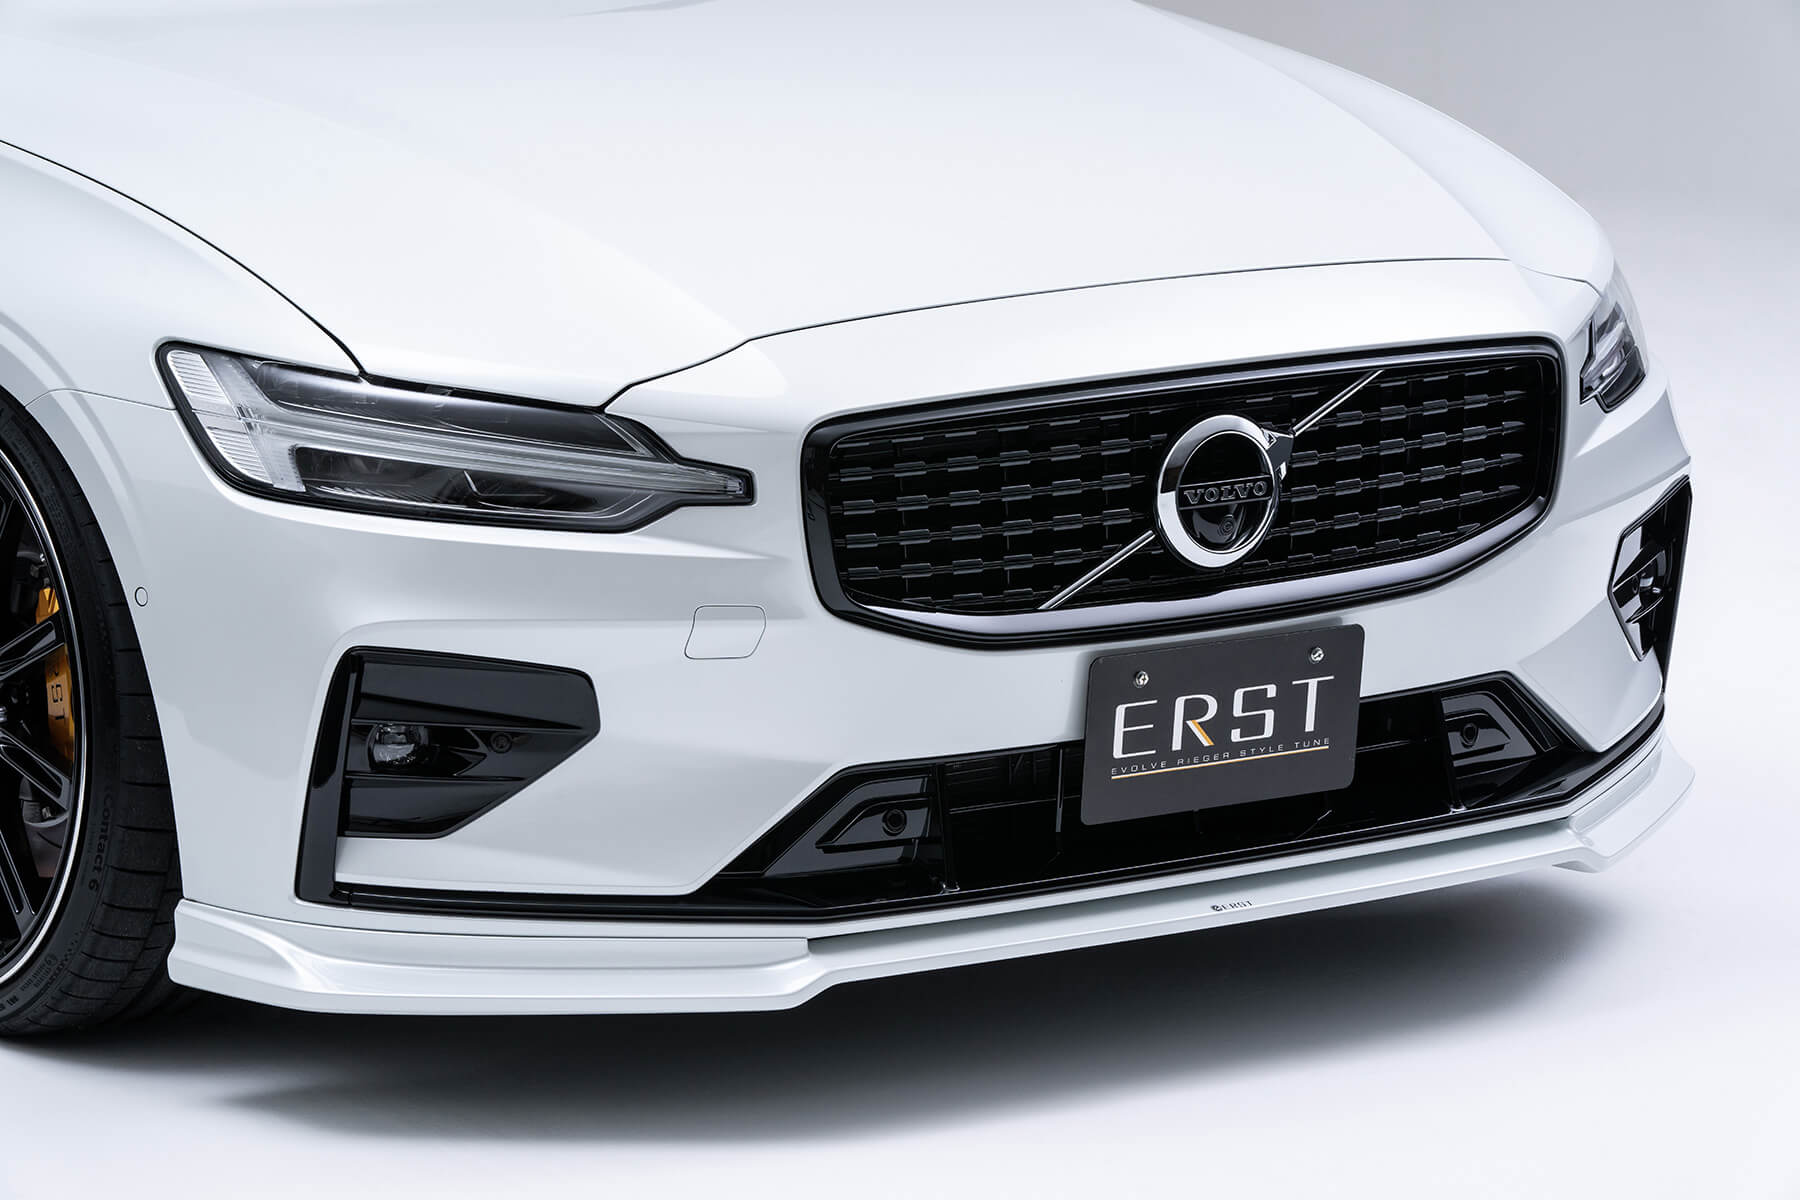 Check our price and buy ERST body kit for Volvo S60!